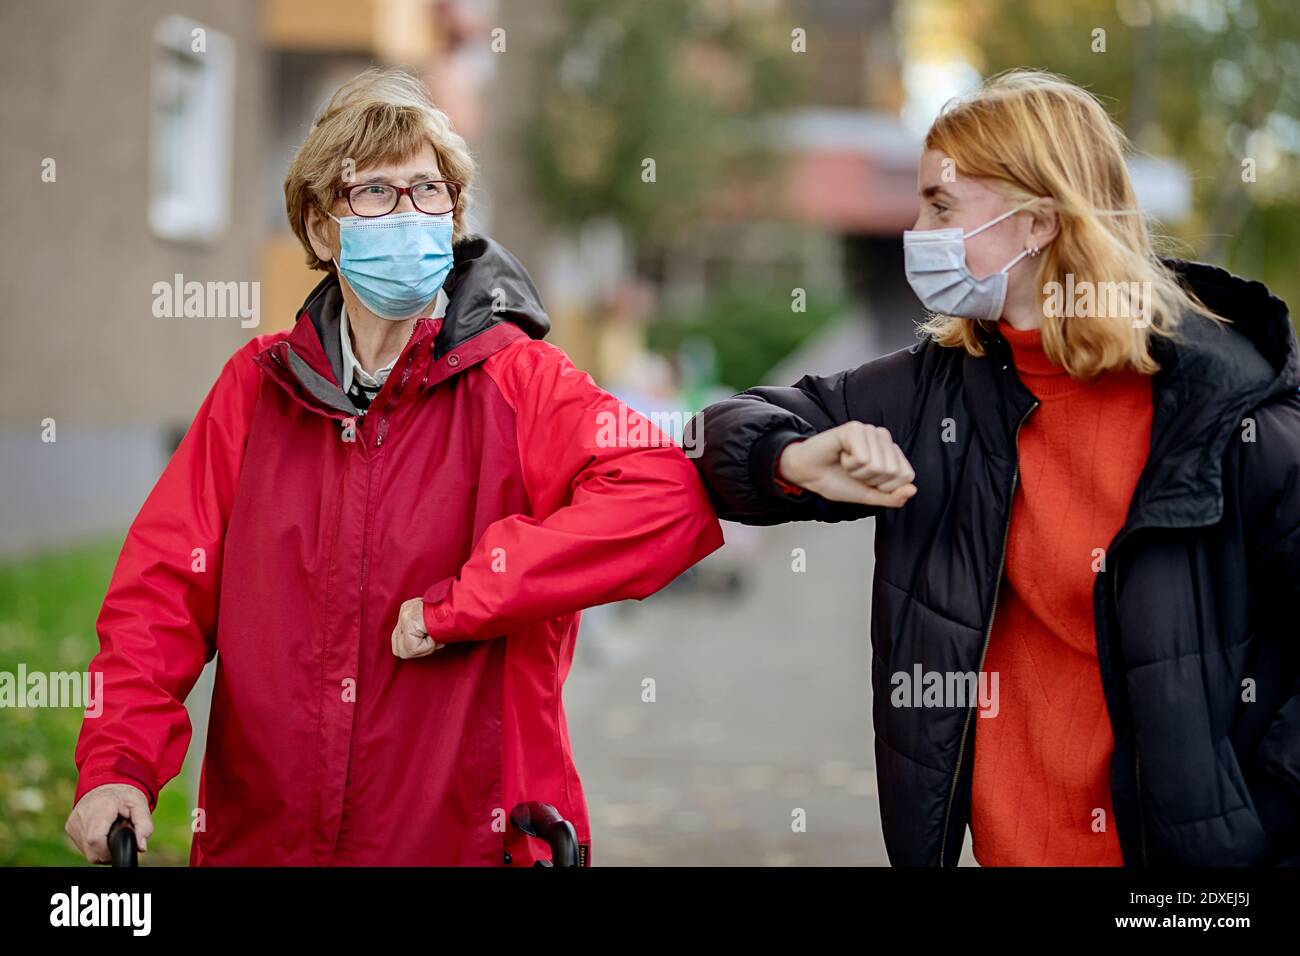 Granddaughter and mother wearing face mask greeting with elbow bump while standing outdoors Stock Photo